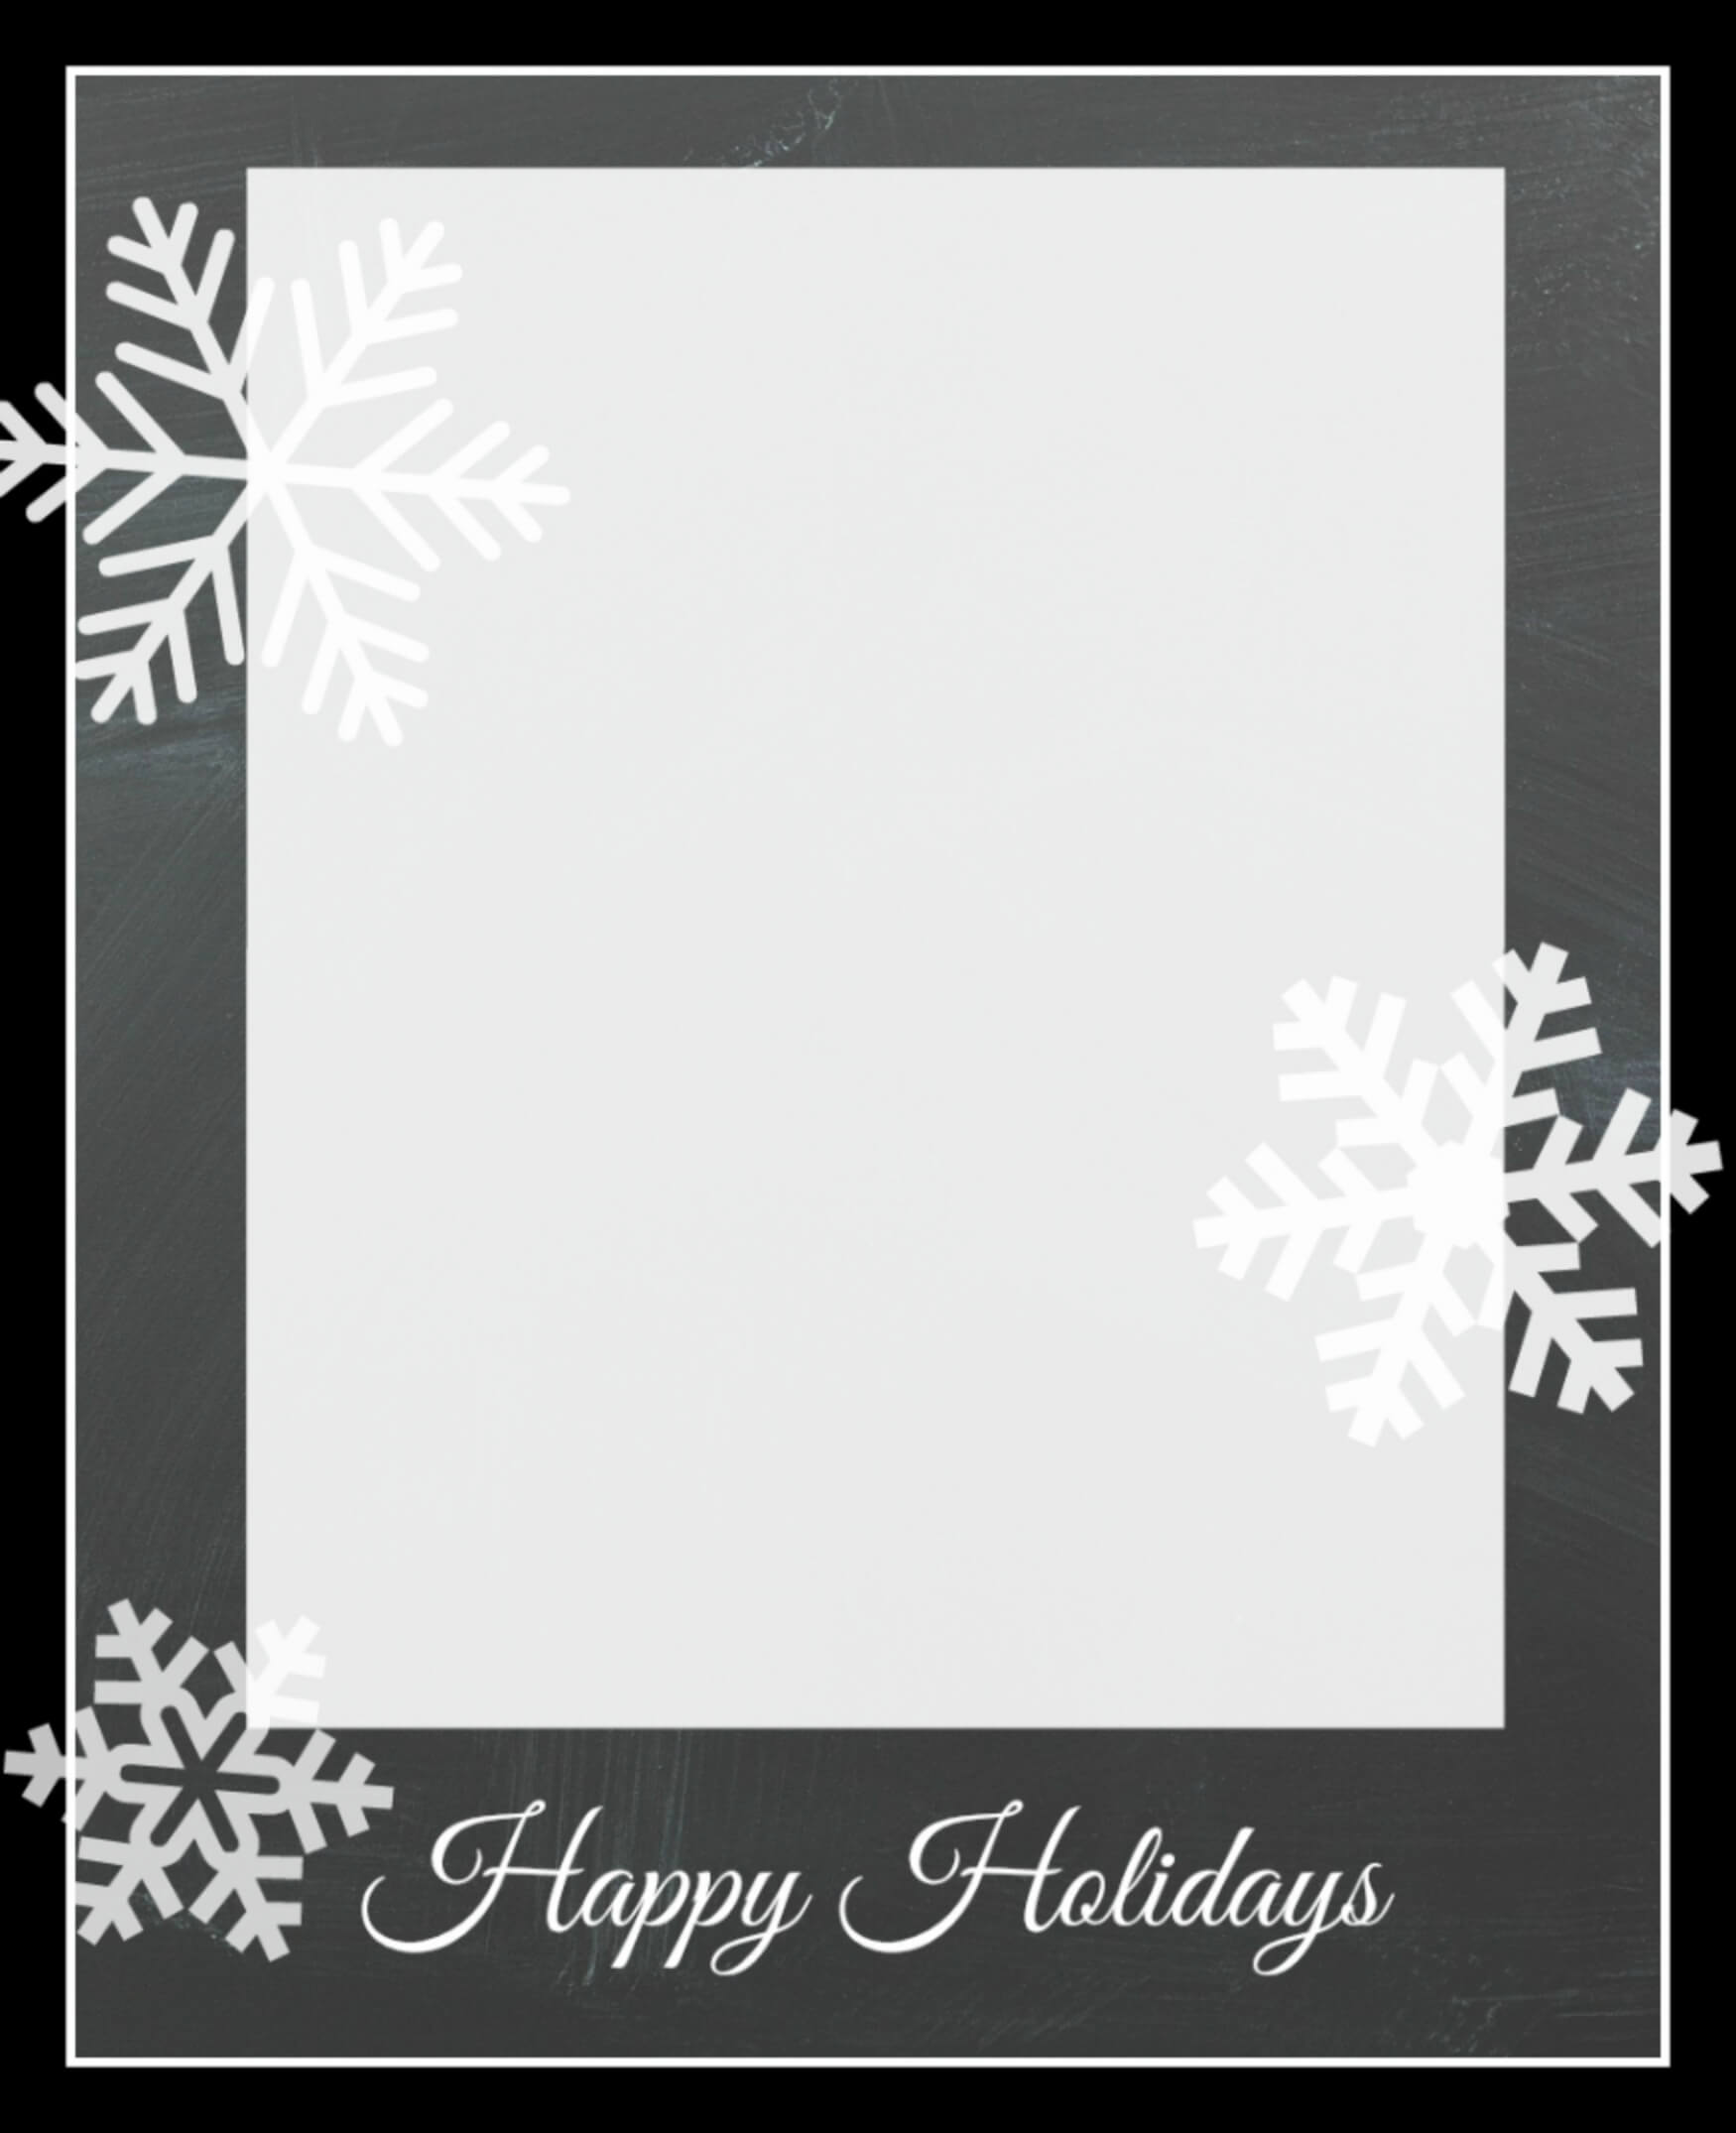 Free Christmas Card Templates – Crazy Little Projects Regarding Free Holiday Photo Card Templates